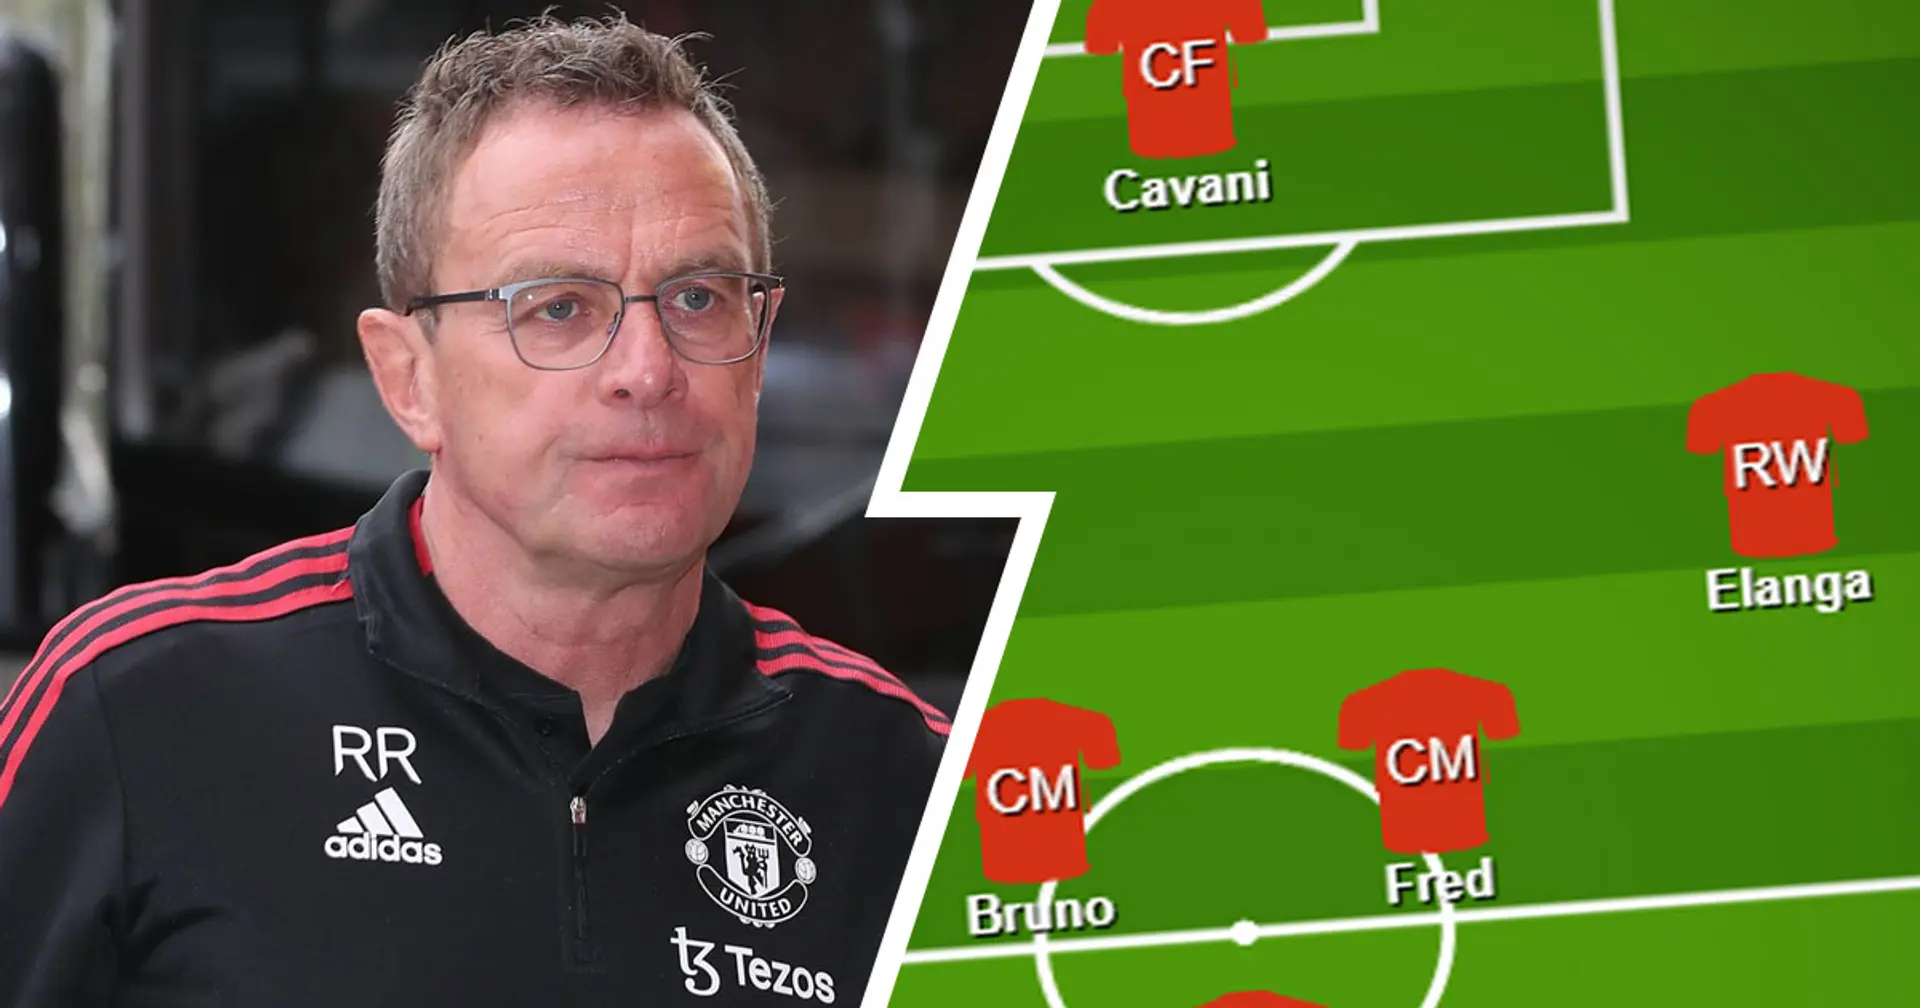 Start the youngsters or outgoing players? Select your favorite Man United XI vs Crystal Palace from 2 options